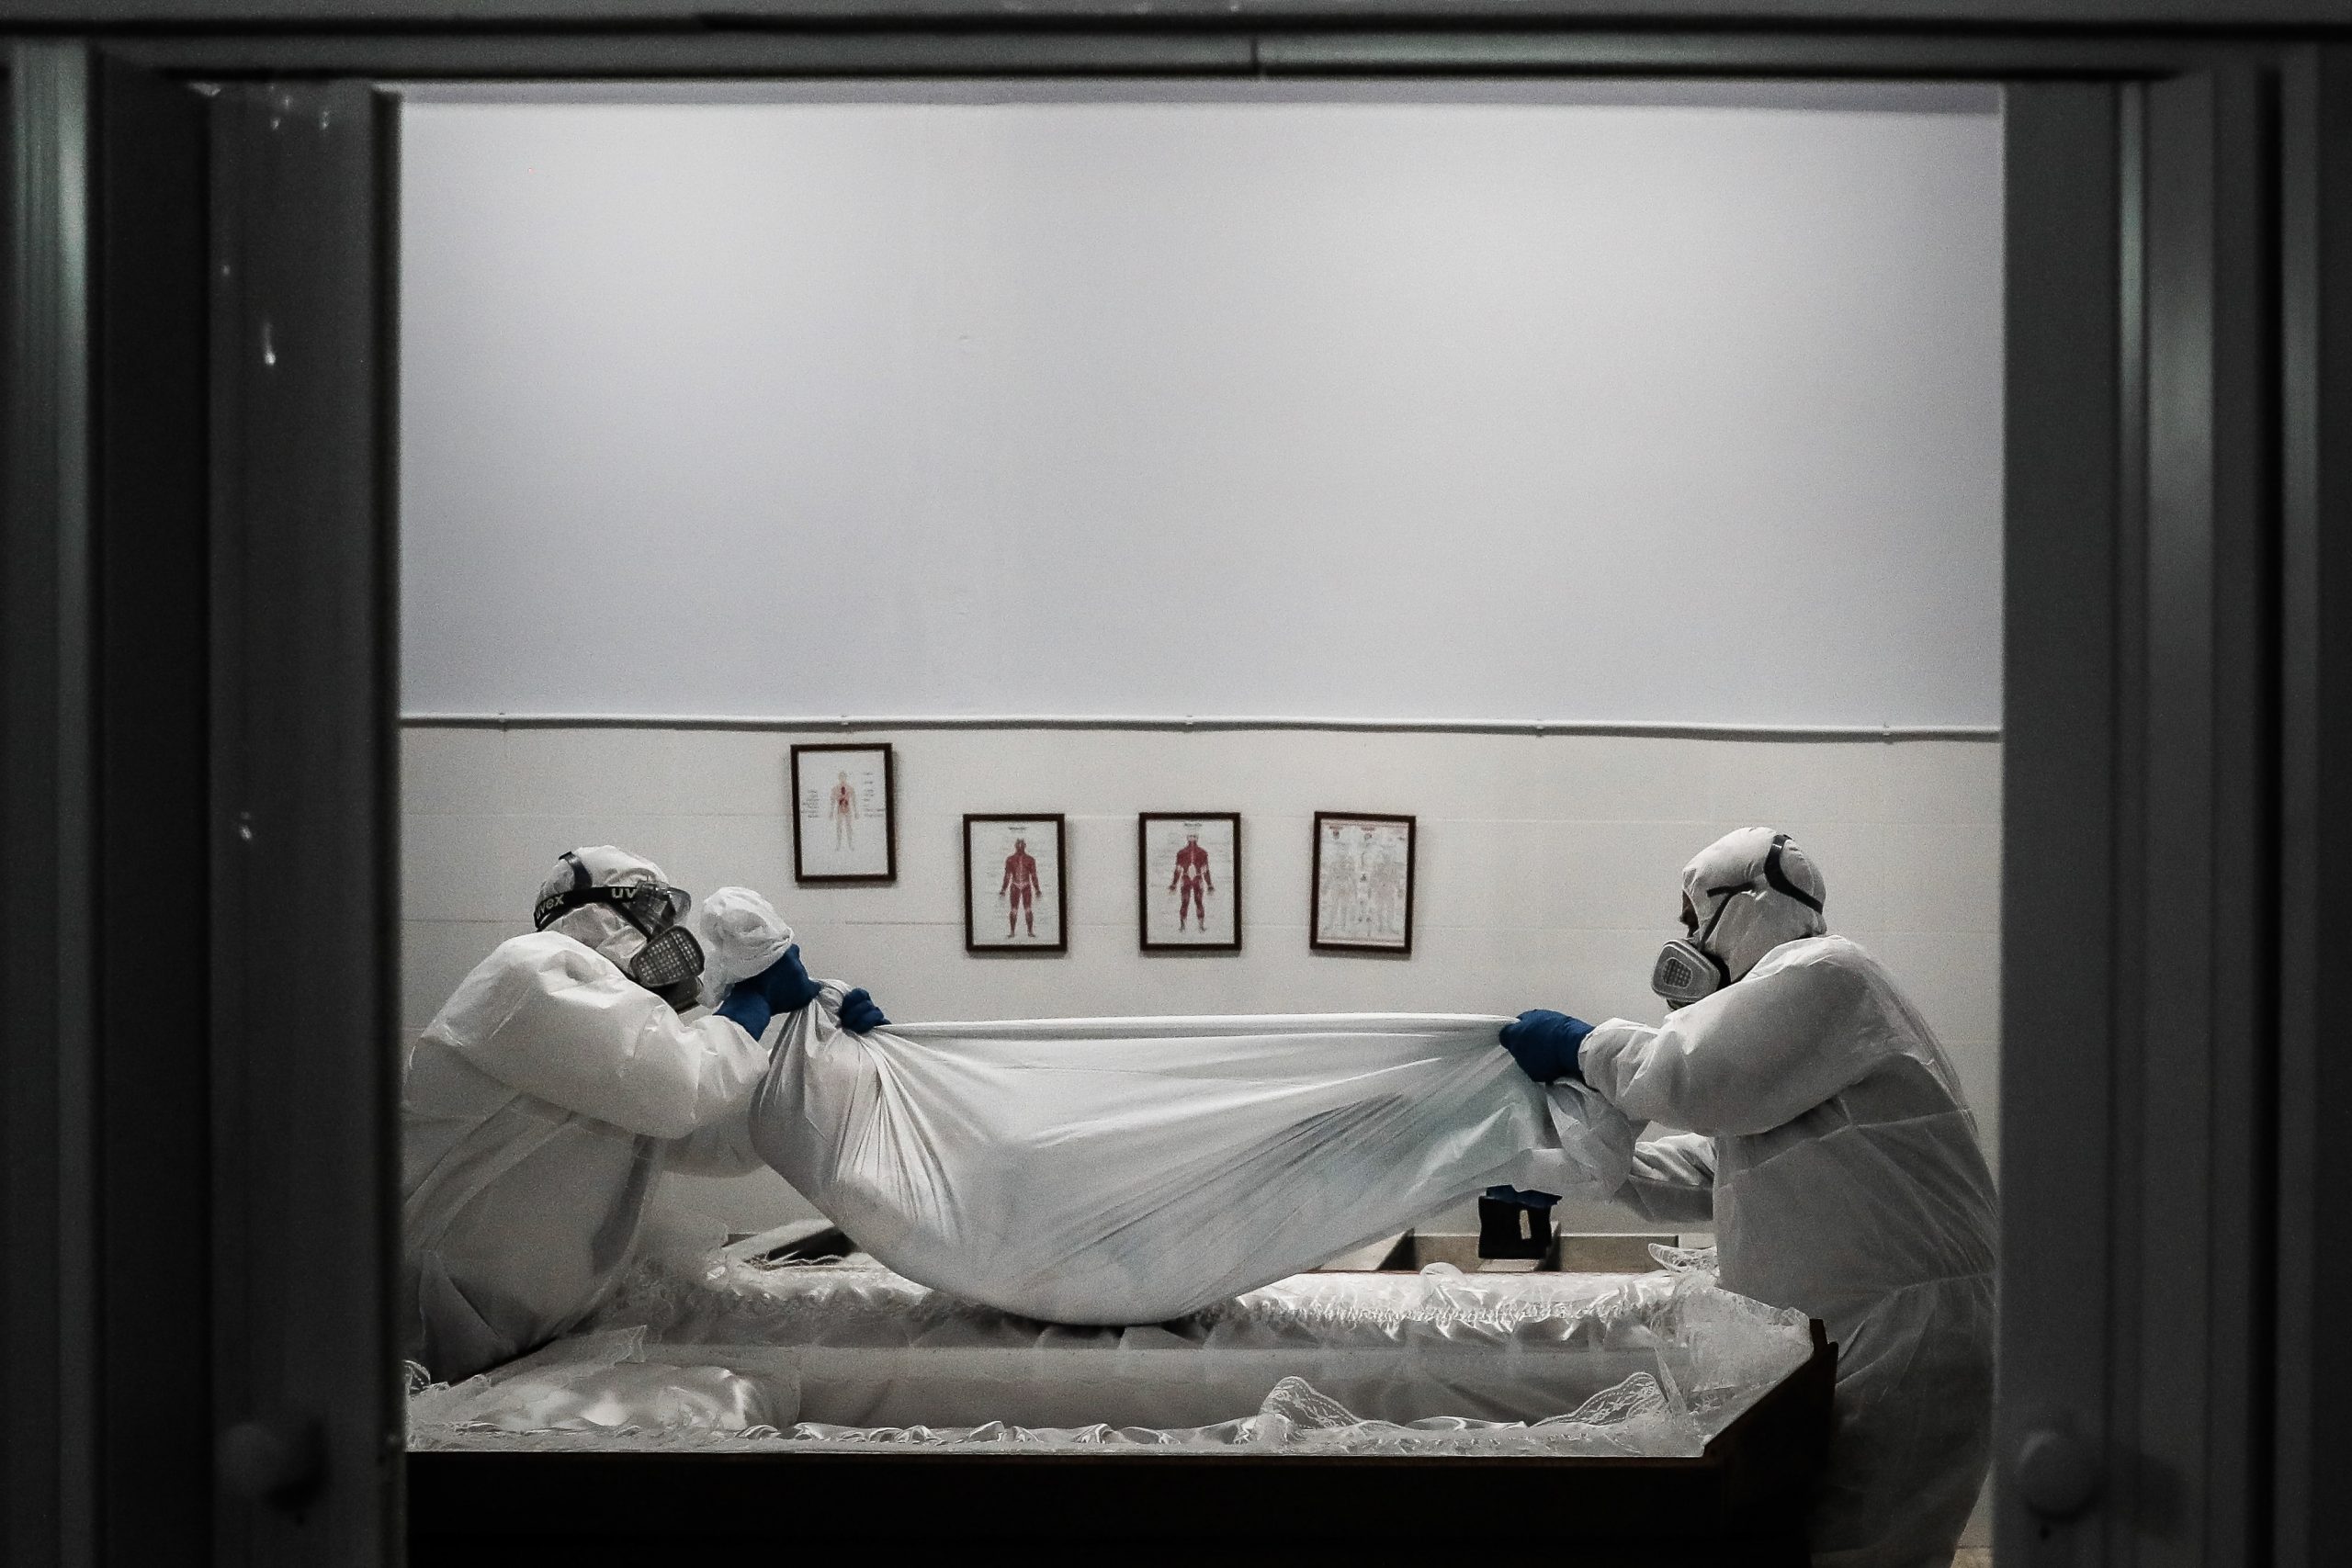 epa08976010 Funerary workers wearing protective suits hold the body of a woman, who died of Covid-19, in Amadora, outskirts of Lisbon, Portugal, 29 January 2021 (issued on 30 January 2021). This week Portugal surpassed 300 covid-19 deaths in a single day, a new maximum of deaths since the beginning of the pandemic. Portuguese government imposed a 14-day national lockdown including foreign travel restrictions, as the country is fighting the surge of new variant of coronavirus Covid-19 that puts the health care system under severe pressure.  EPA/MARIO CRUZ  ATTENTION: This Image is part of a PHOTO SET